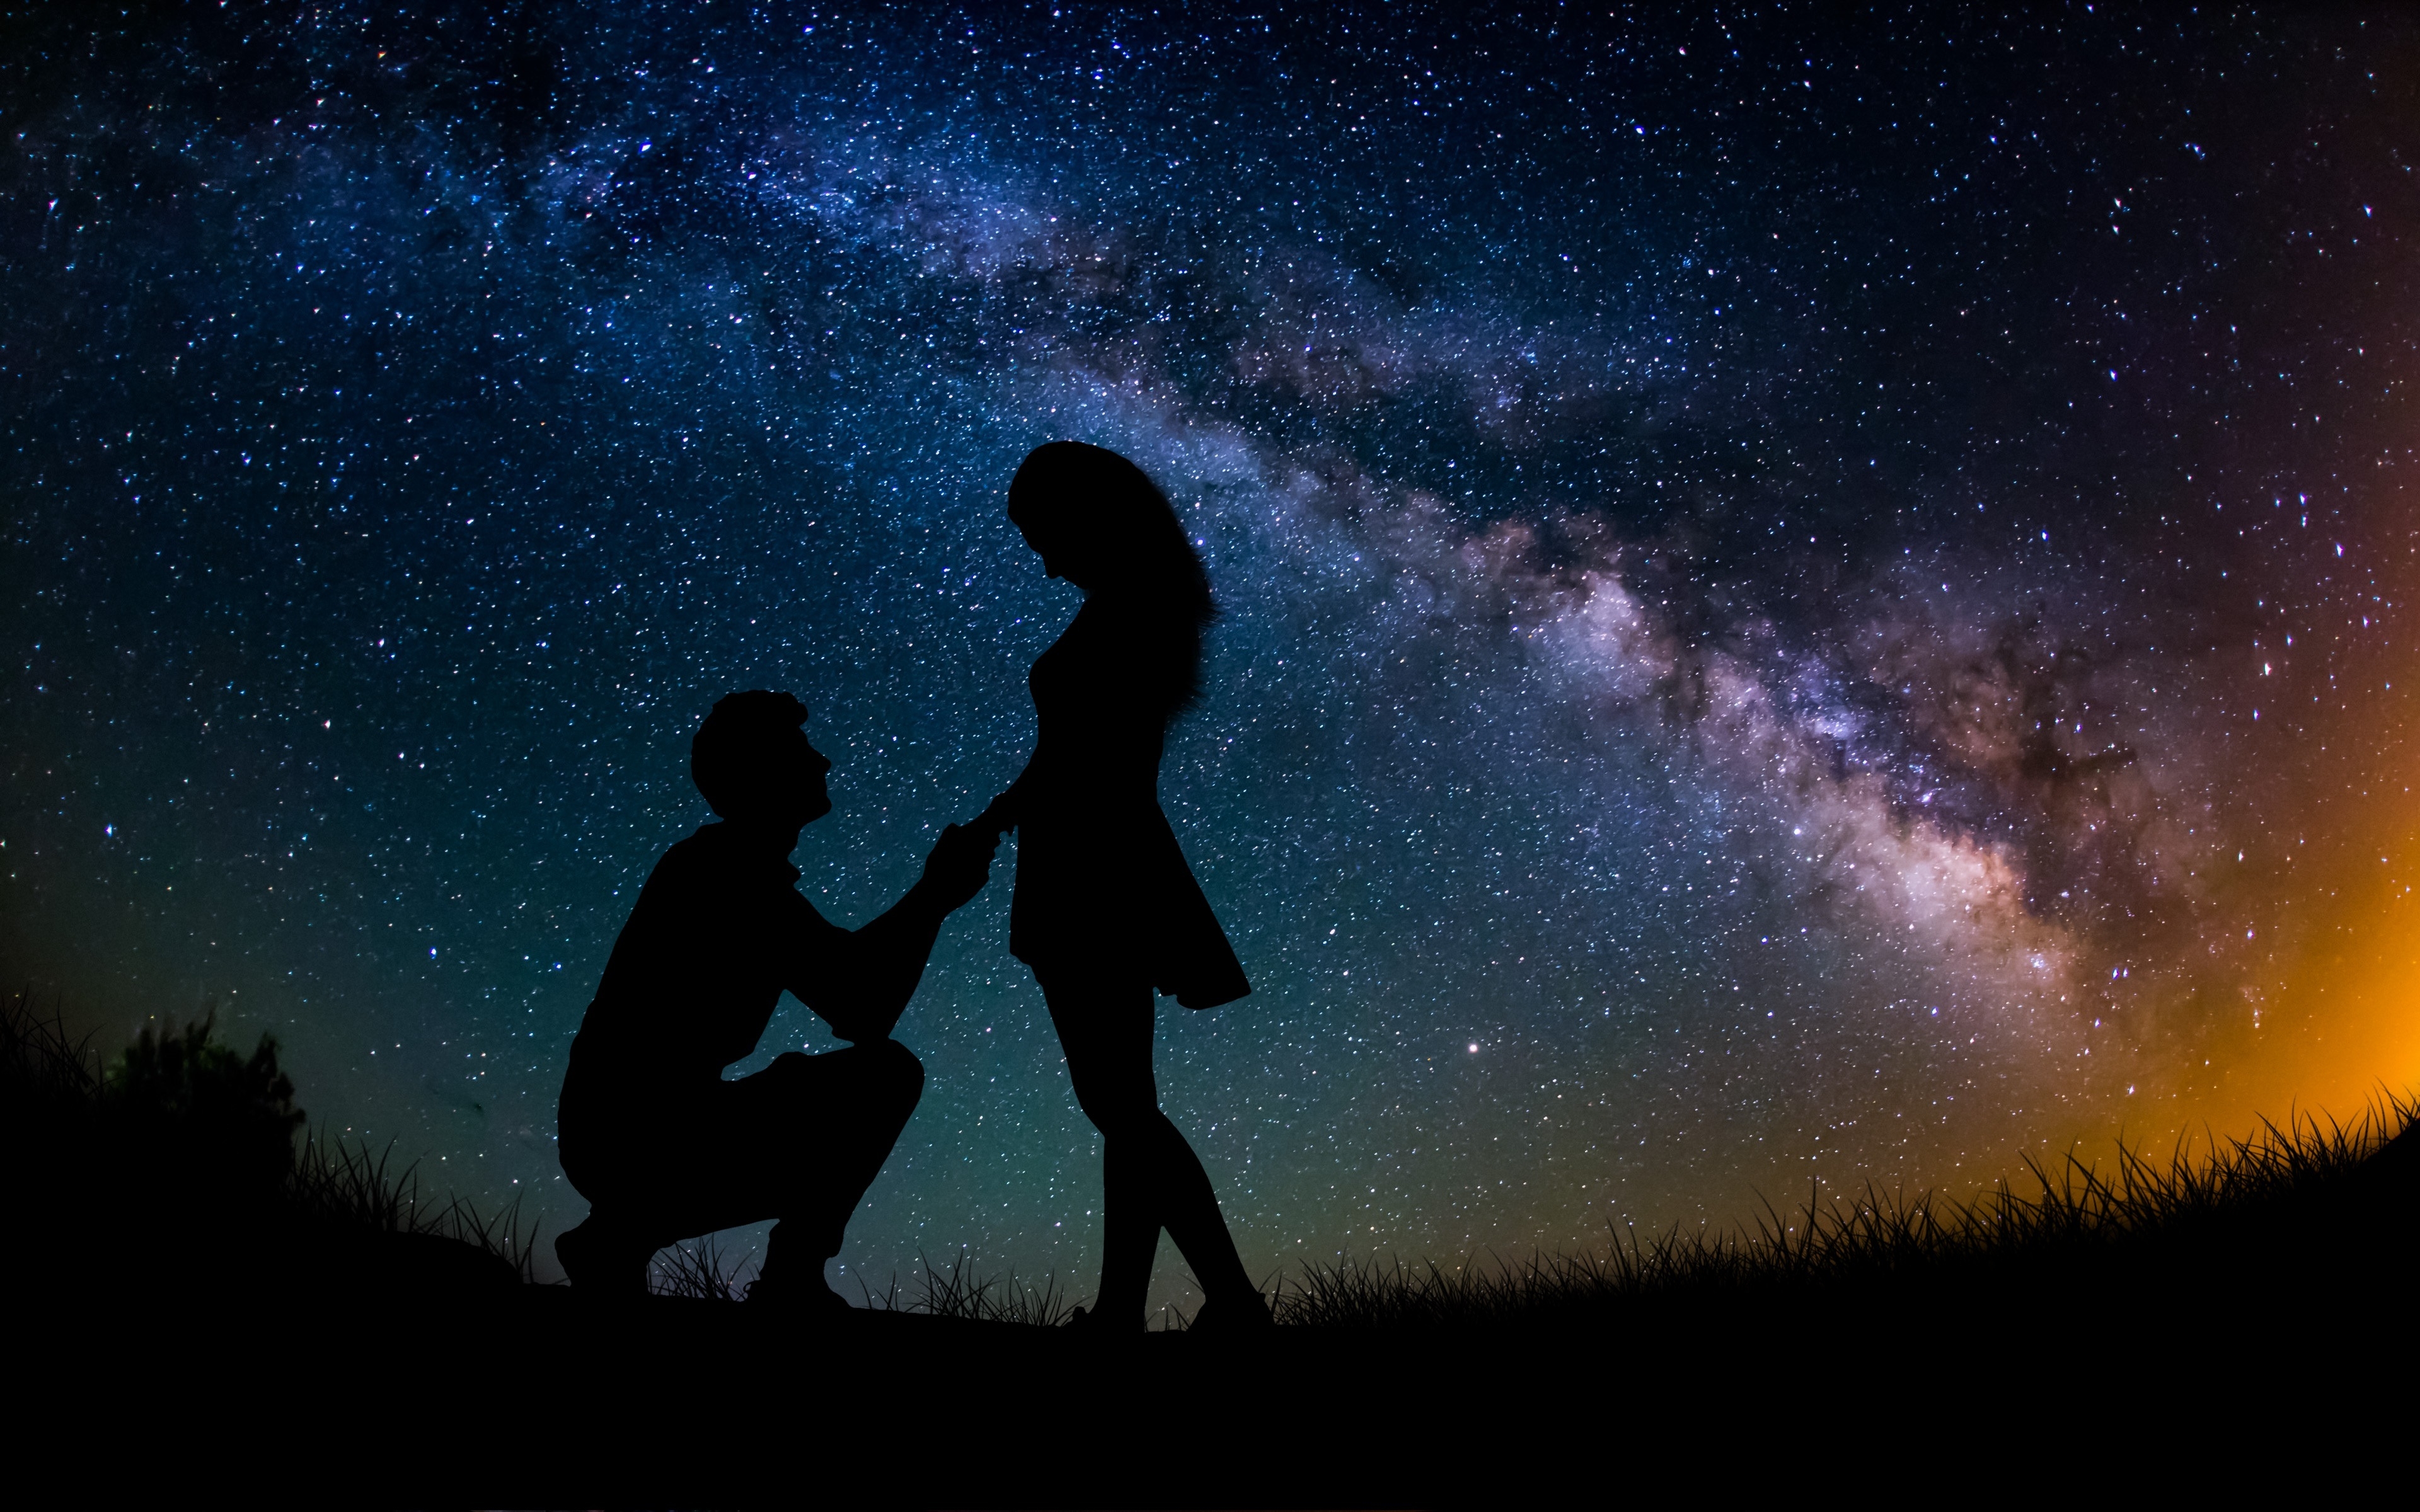 HD wallpaper, Romantic, Starry Sky, Engagement, Silhouette, Lovers, Couple, Proposal